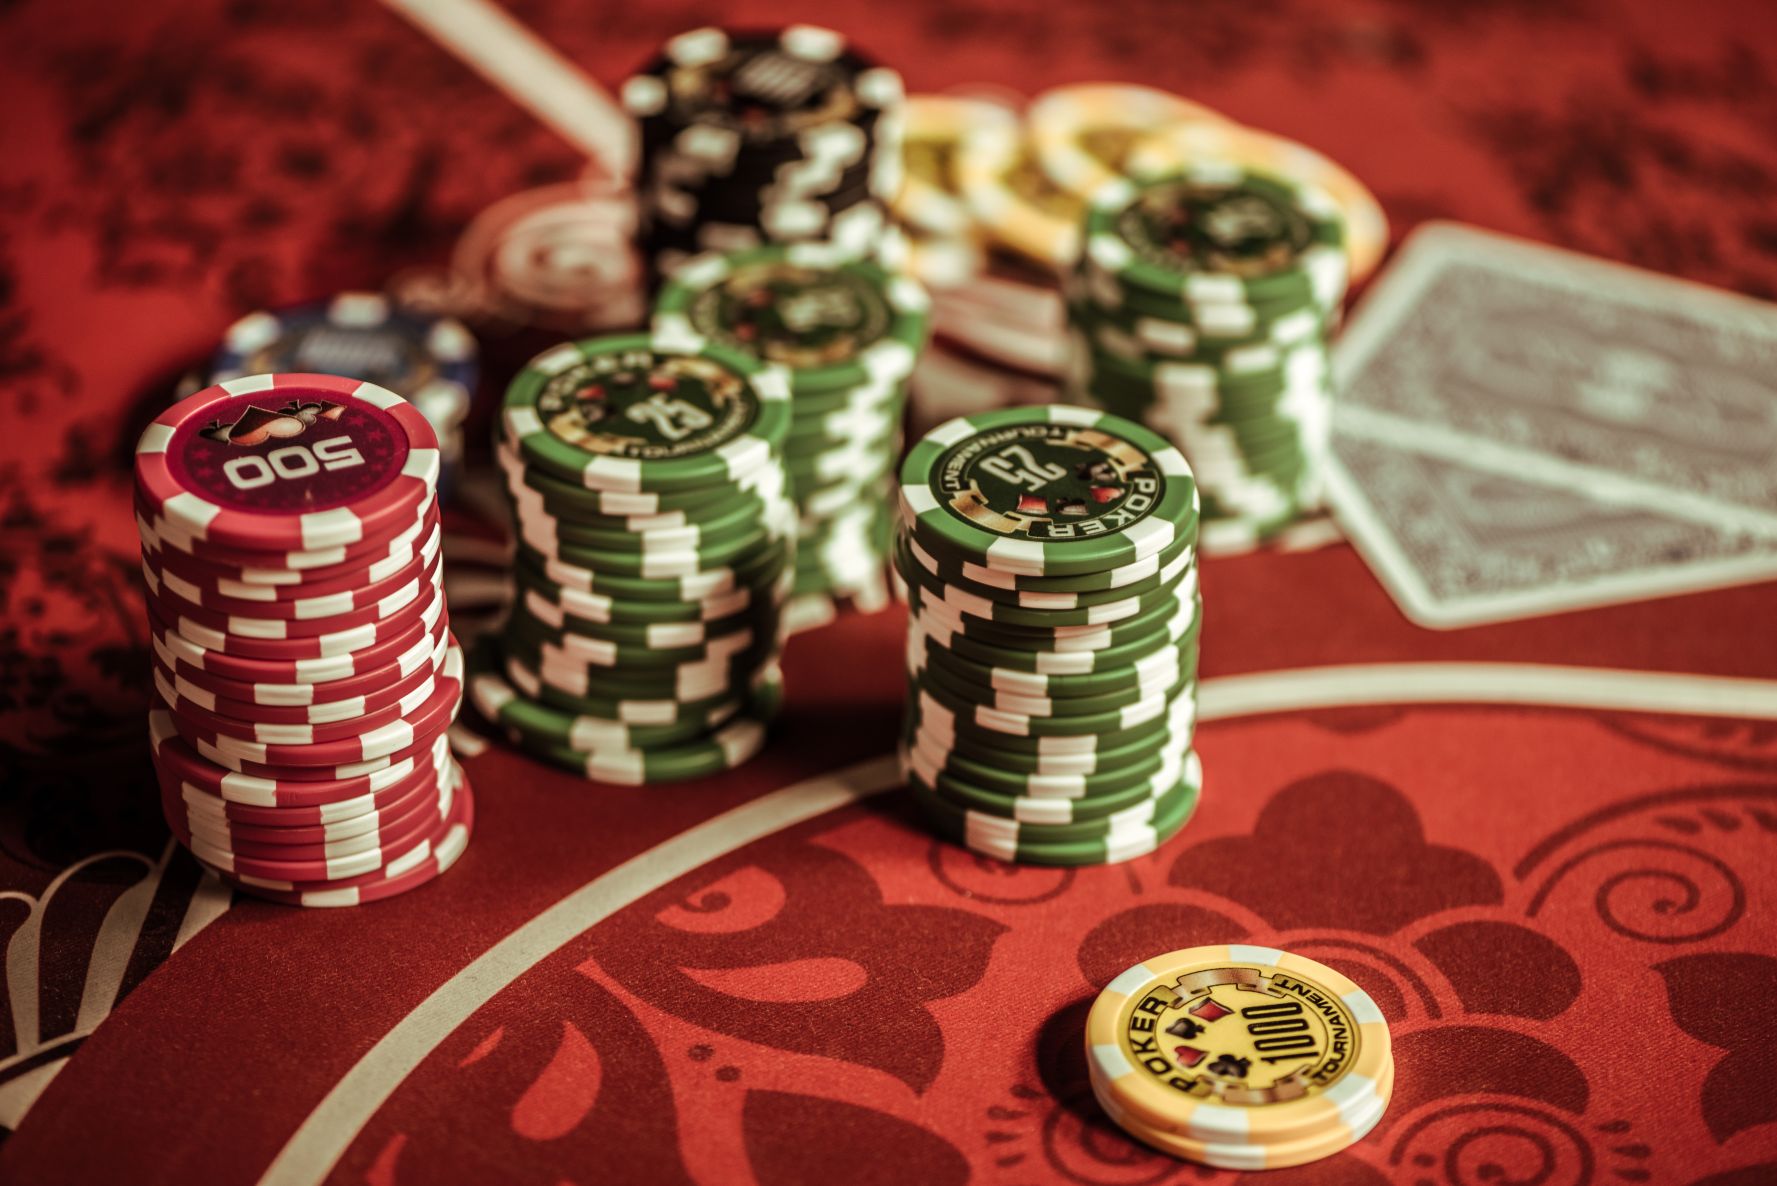 What Could online casino Do To Make You Switch?